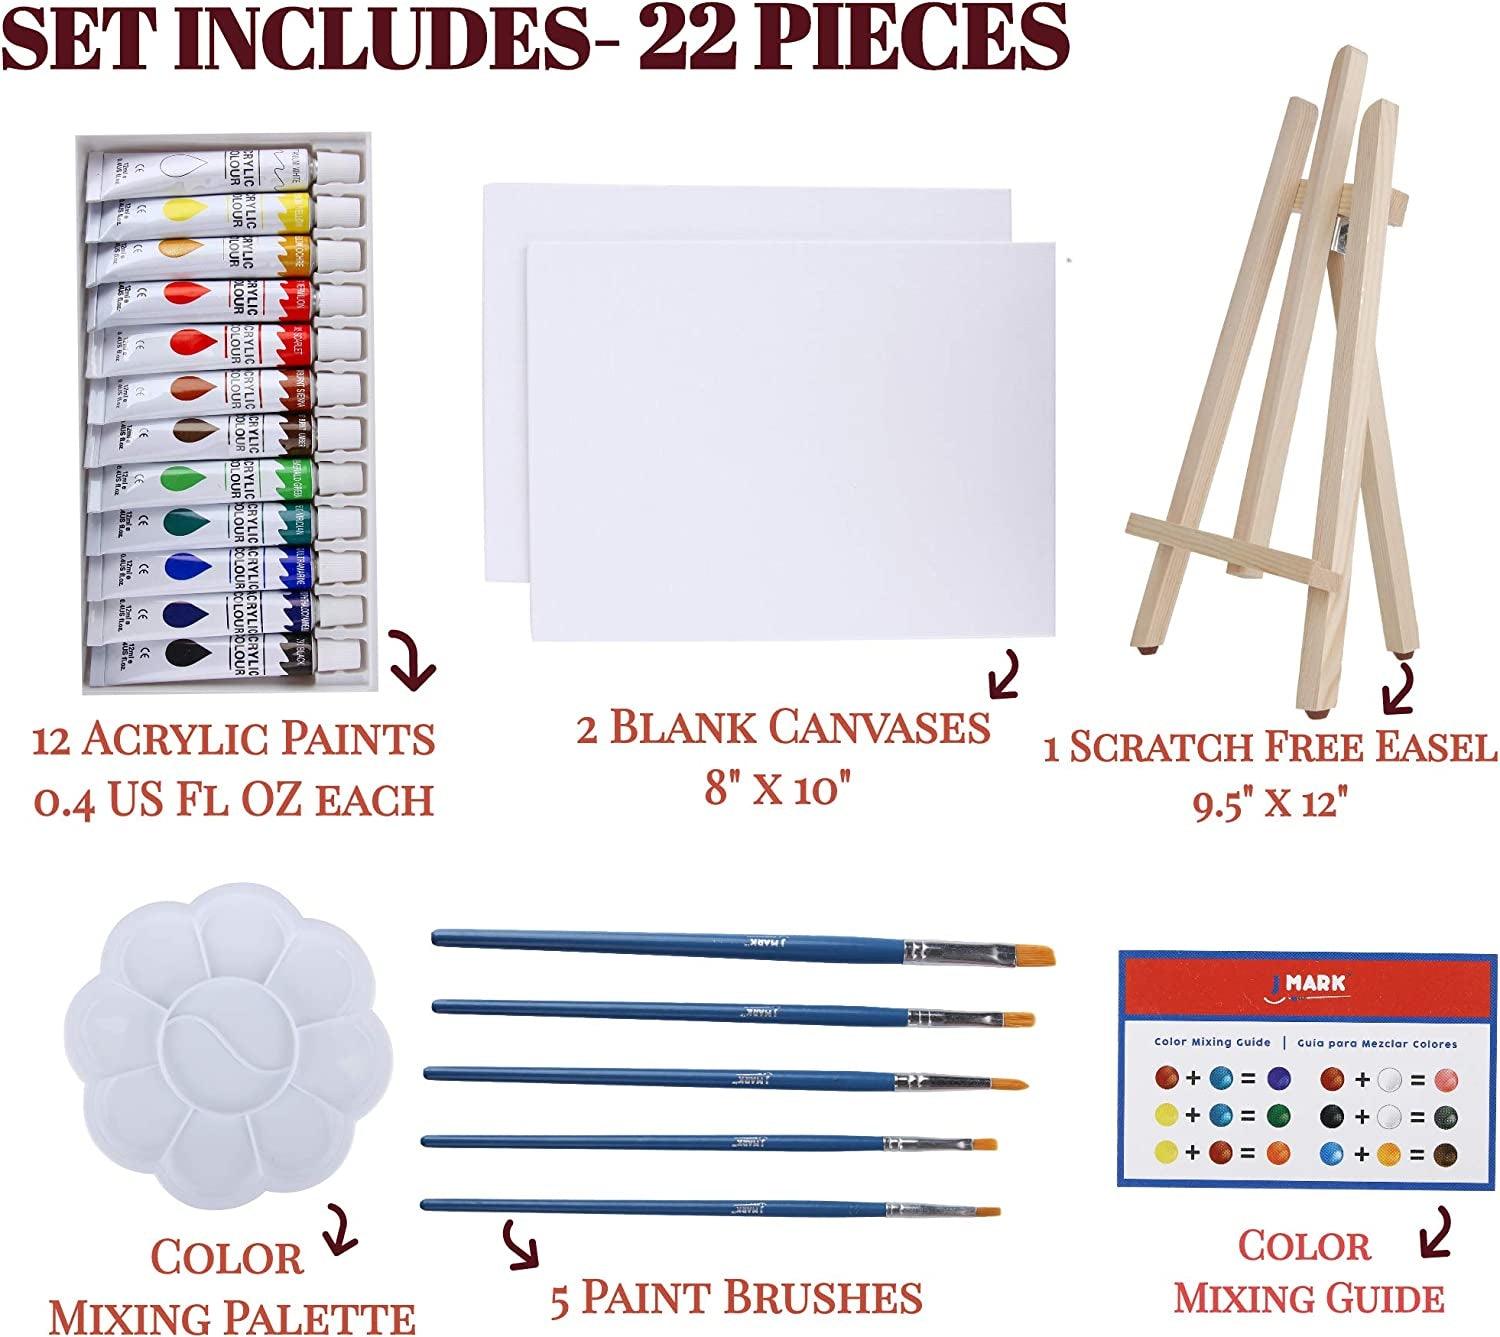  J MARK Painting Kit Includes Acrylic Paint Set, 8 x 10 in.  Canvases, Brushes, Palette and More